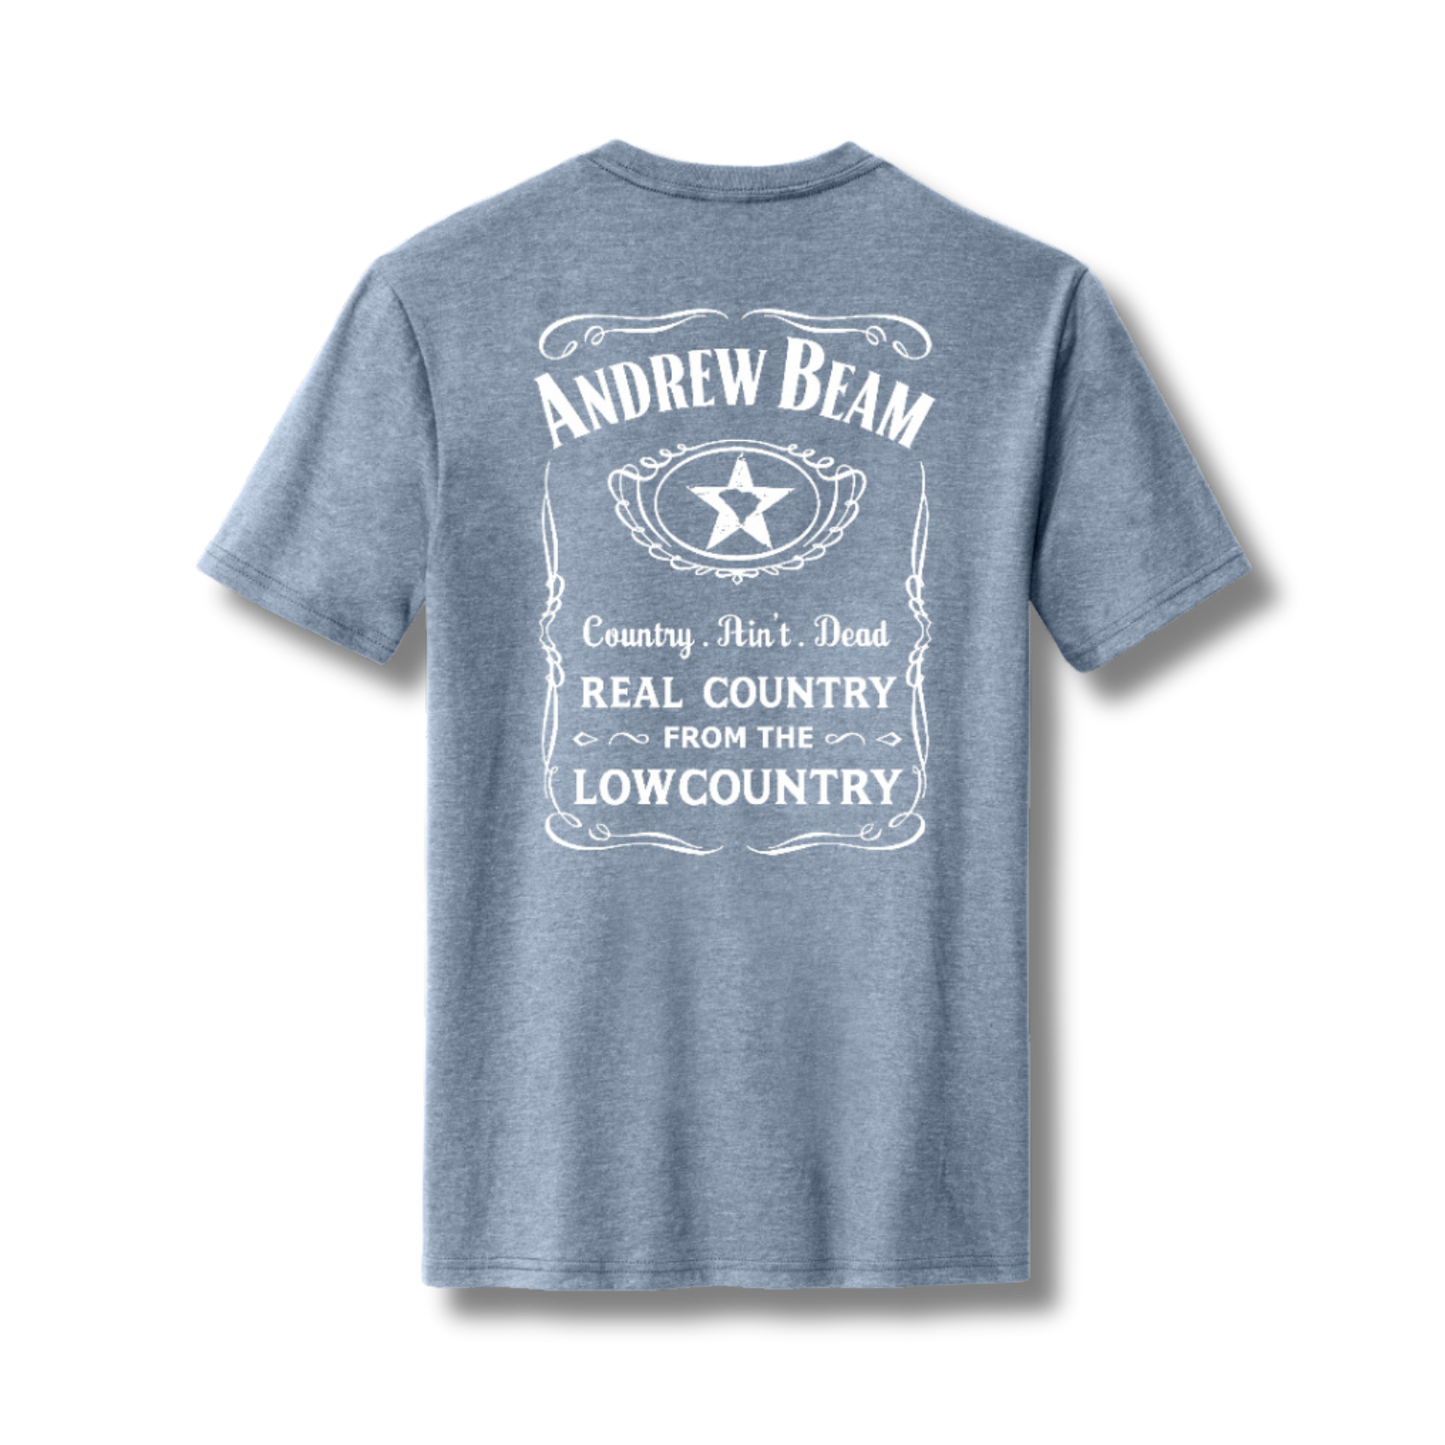 "Country. Ain't. Dead." Tee